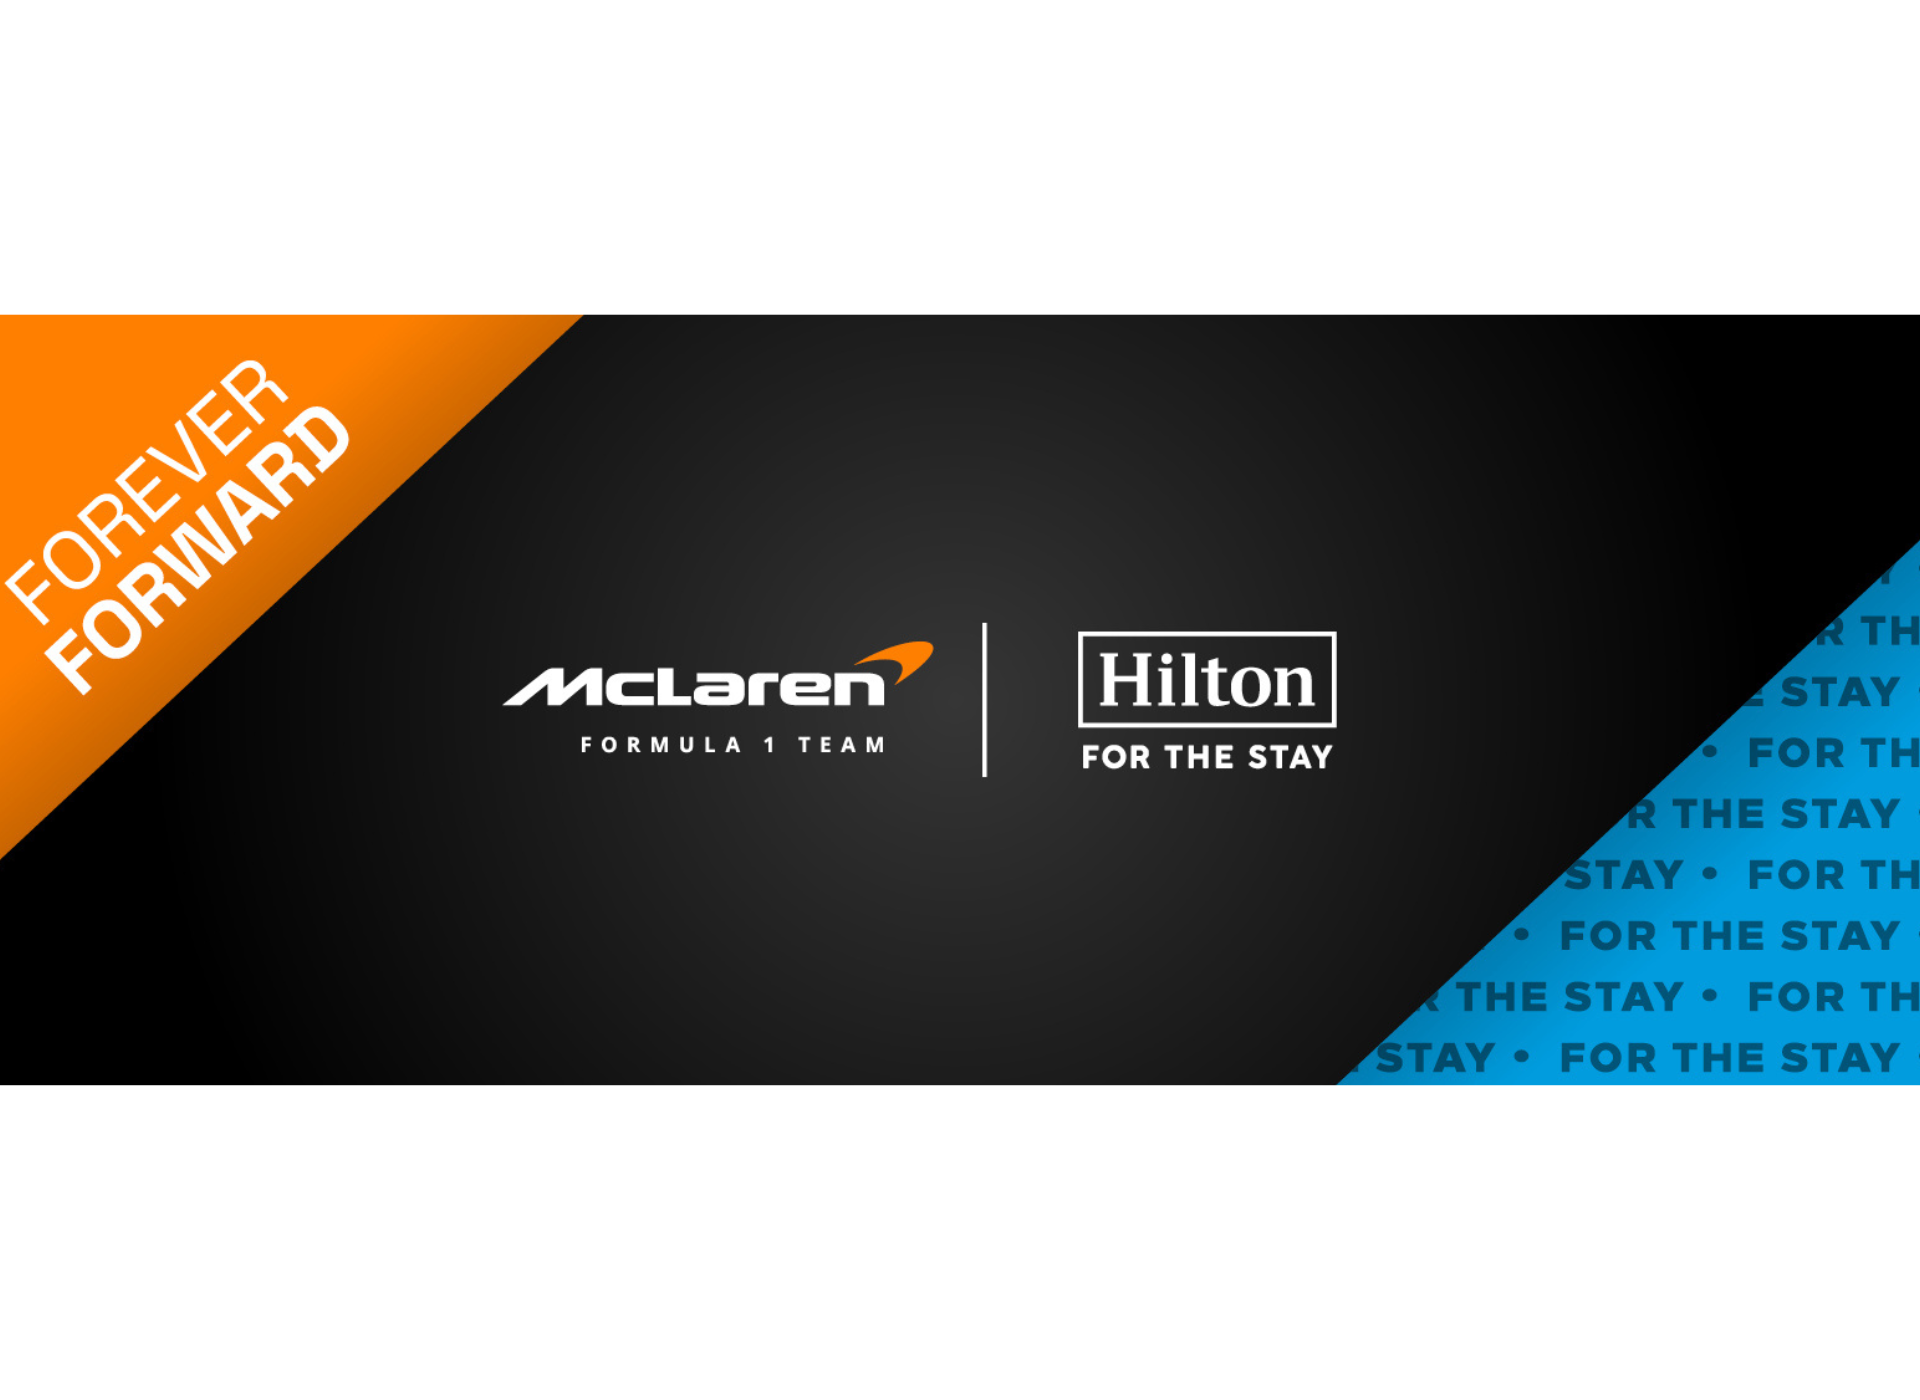 Forever Forward: McLaren Formula 1 Team and Hilton. For the Stay